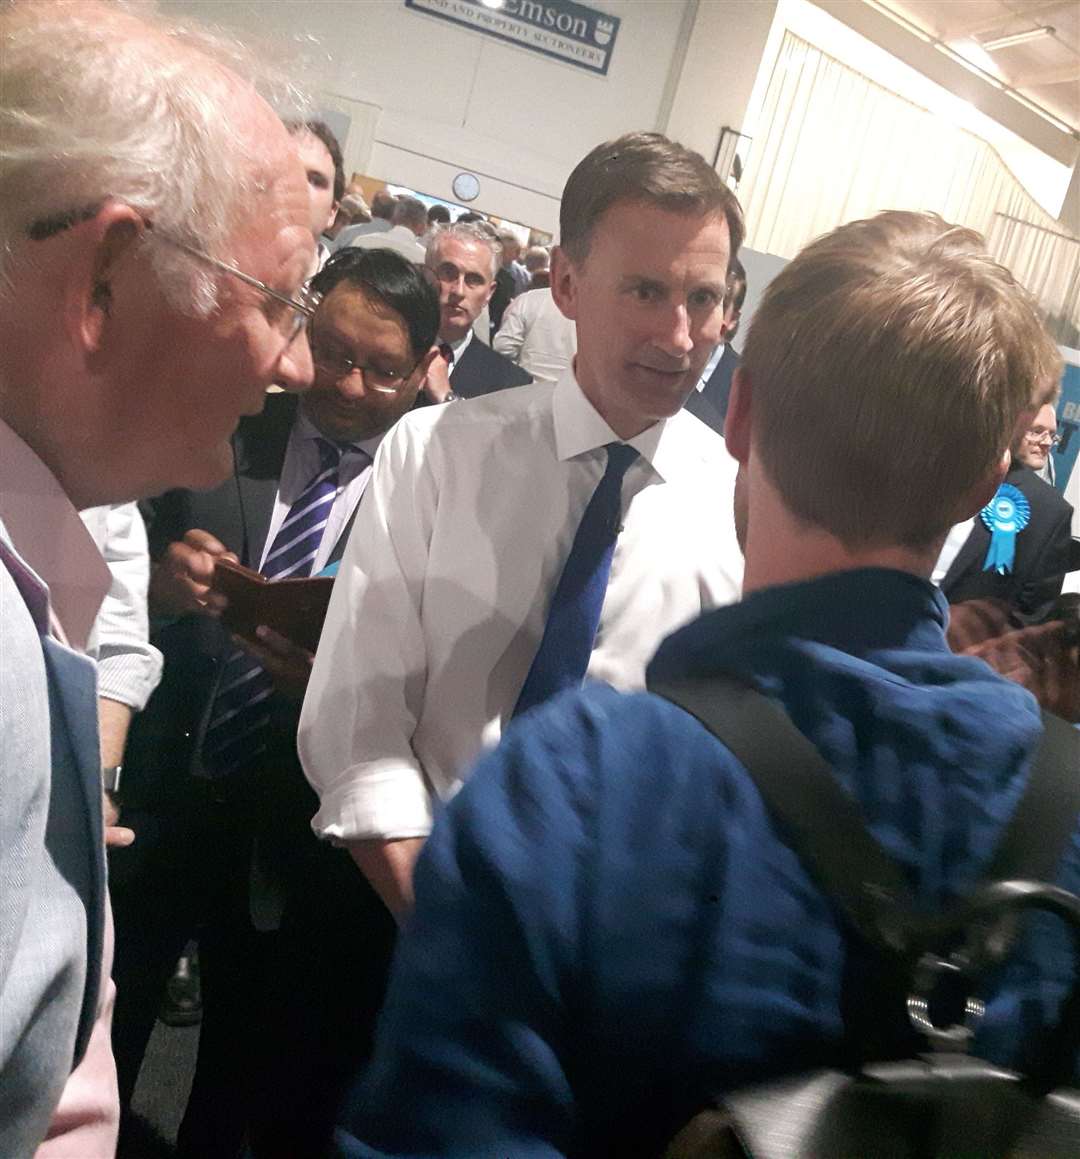 Jeremy Hunt meeting people at the hustings event